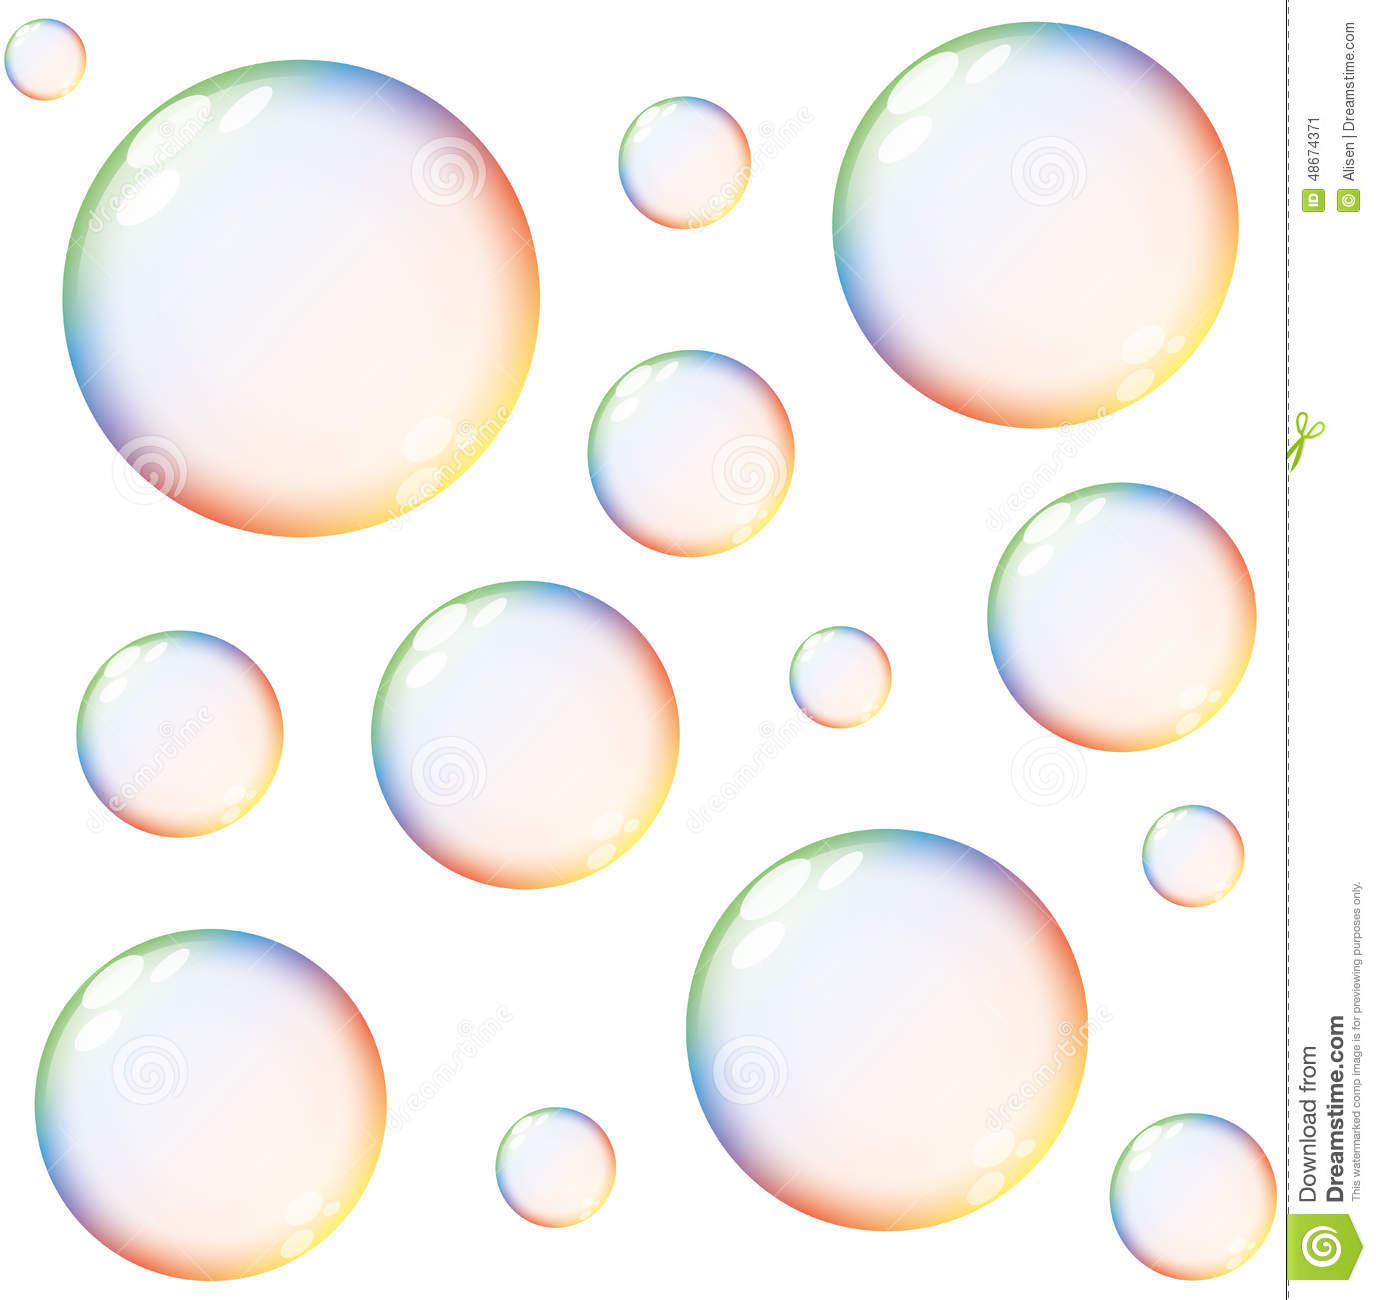 isolated-colorful-rainbow-soap-bubbles-large-small-transparent-48674371.jpg